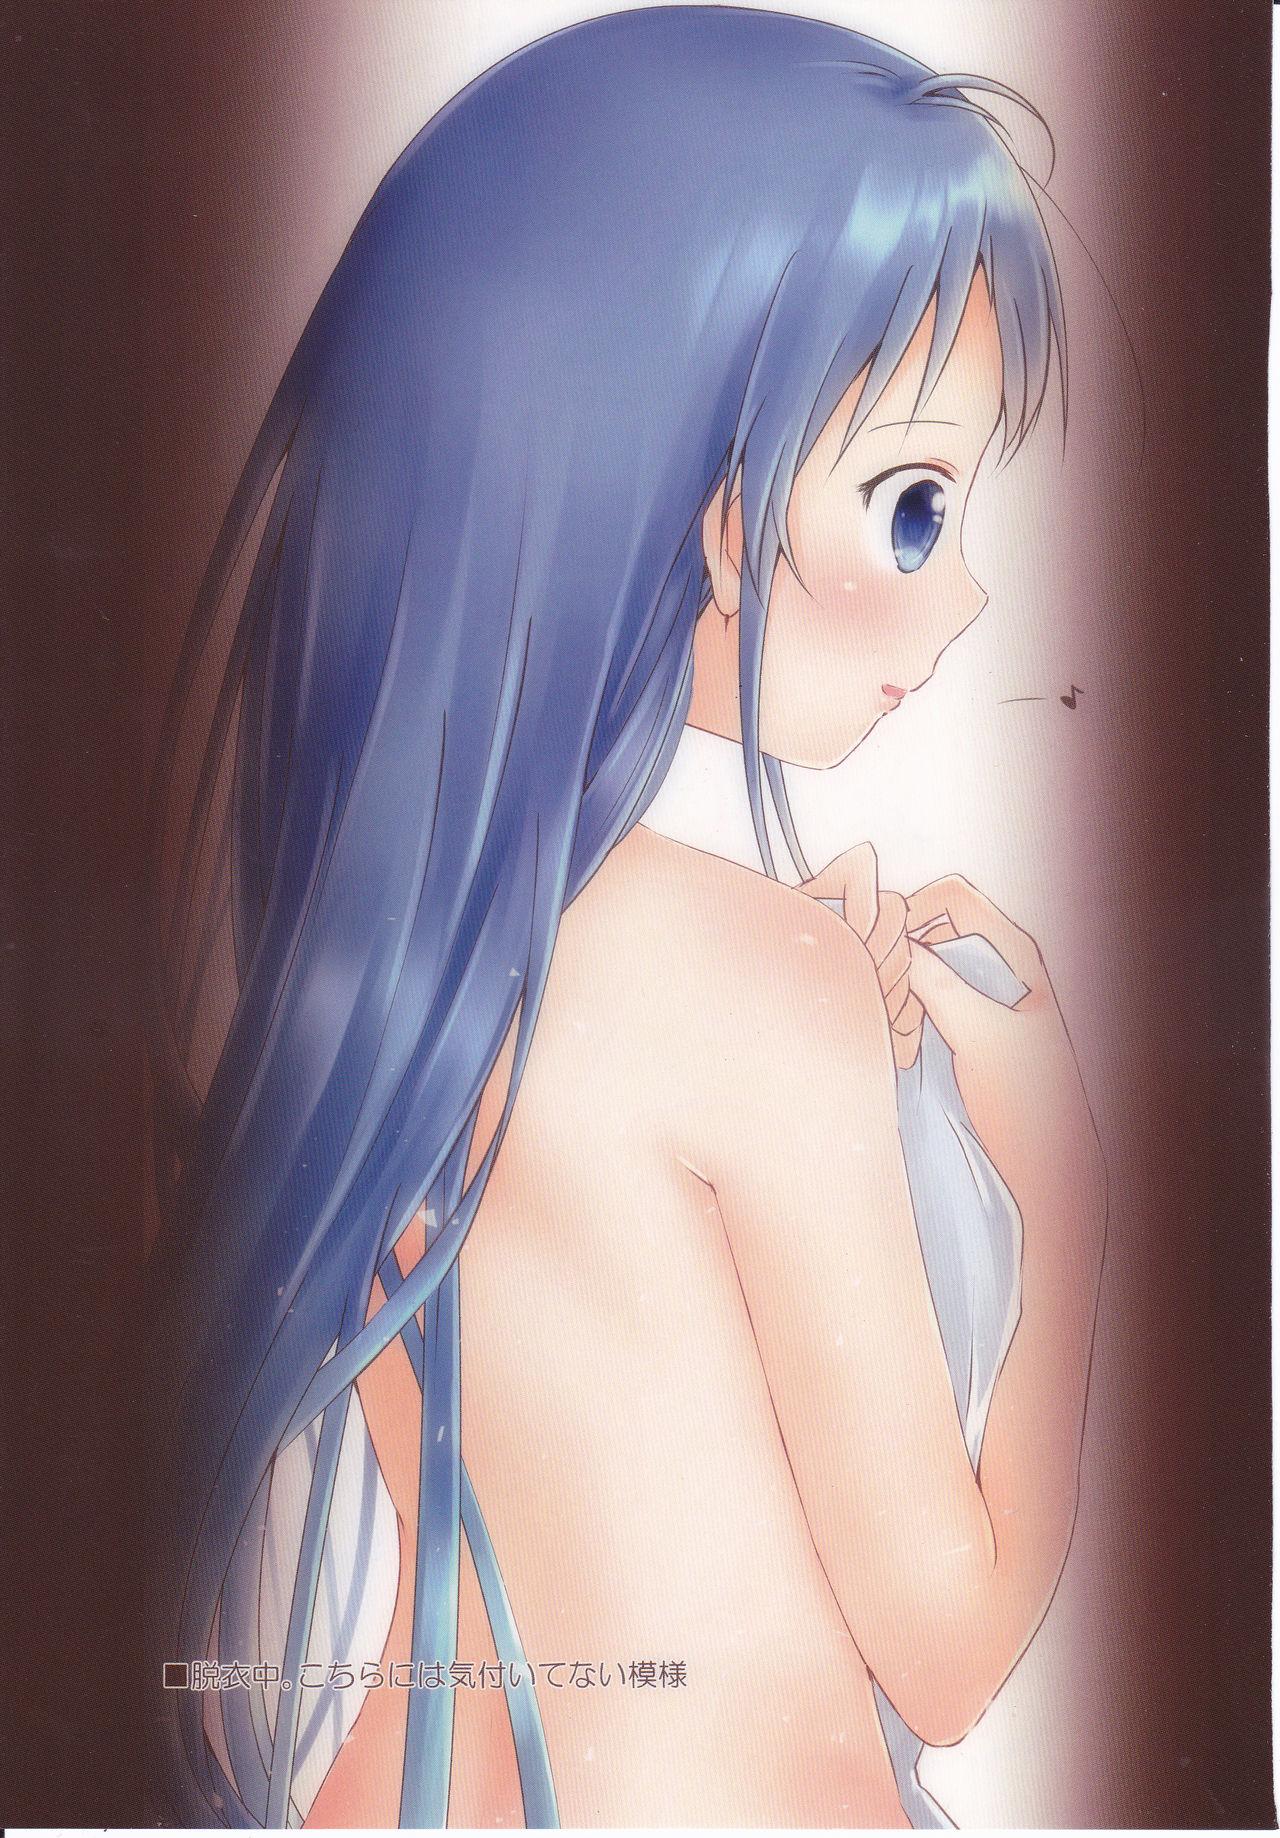 Party Chotto H na Samidare no asiato 3 - Kantai collection Submission - Page 5